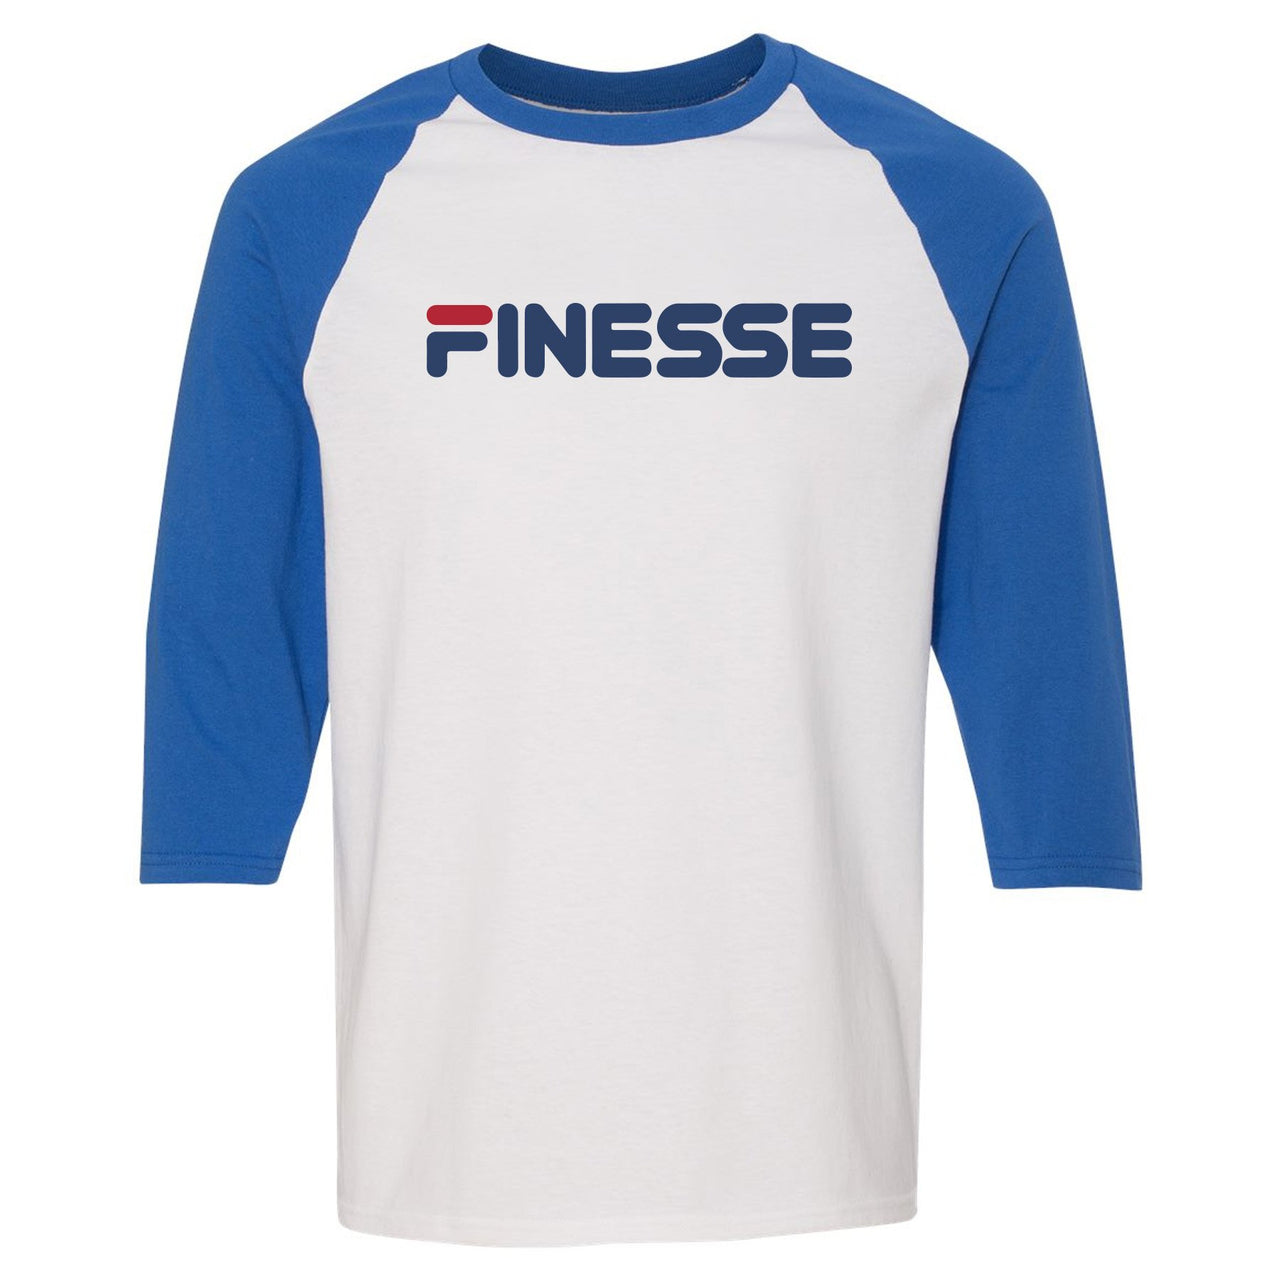 USA One Foams Raglan T Shirt | Finesse, White and Blue